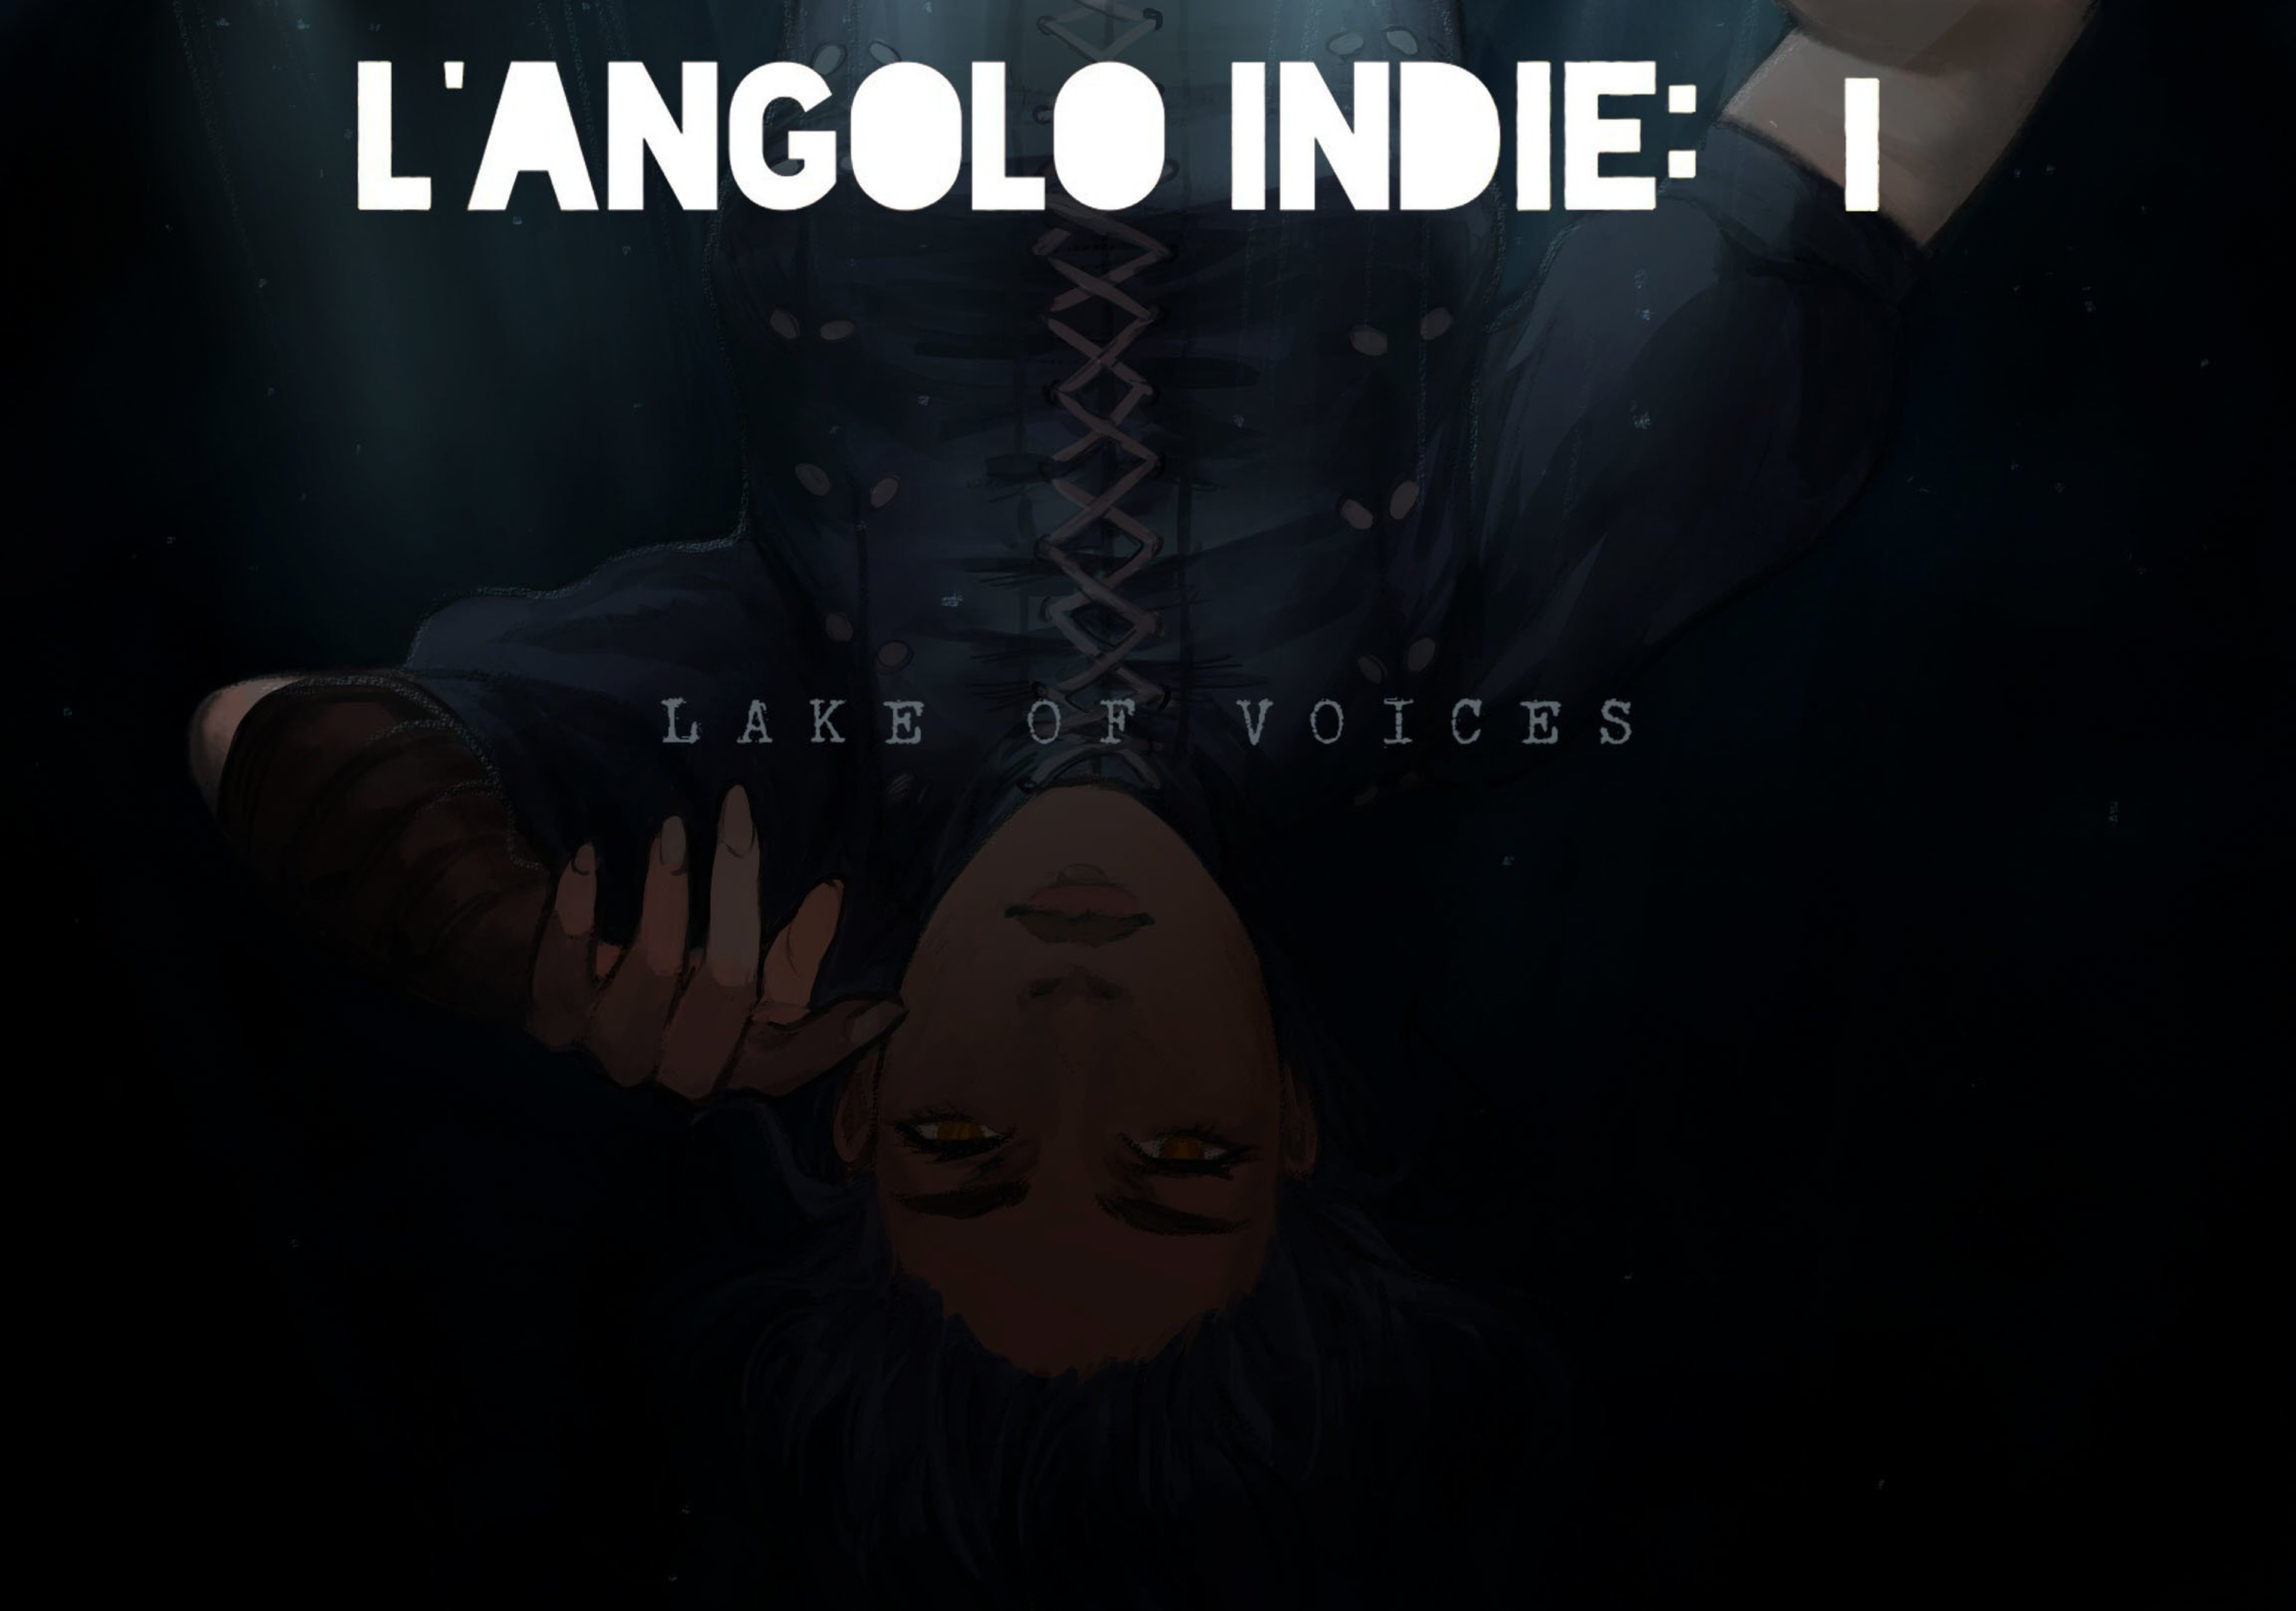 L’angolo Indie: Lake of Voices